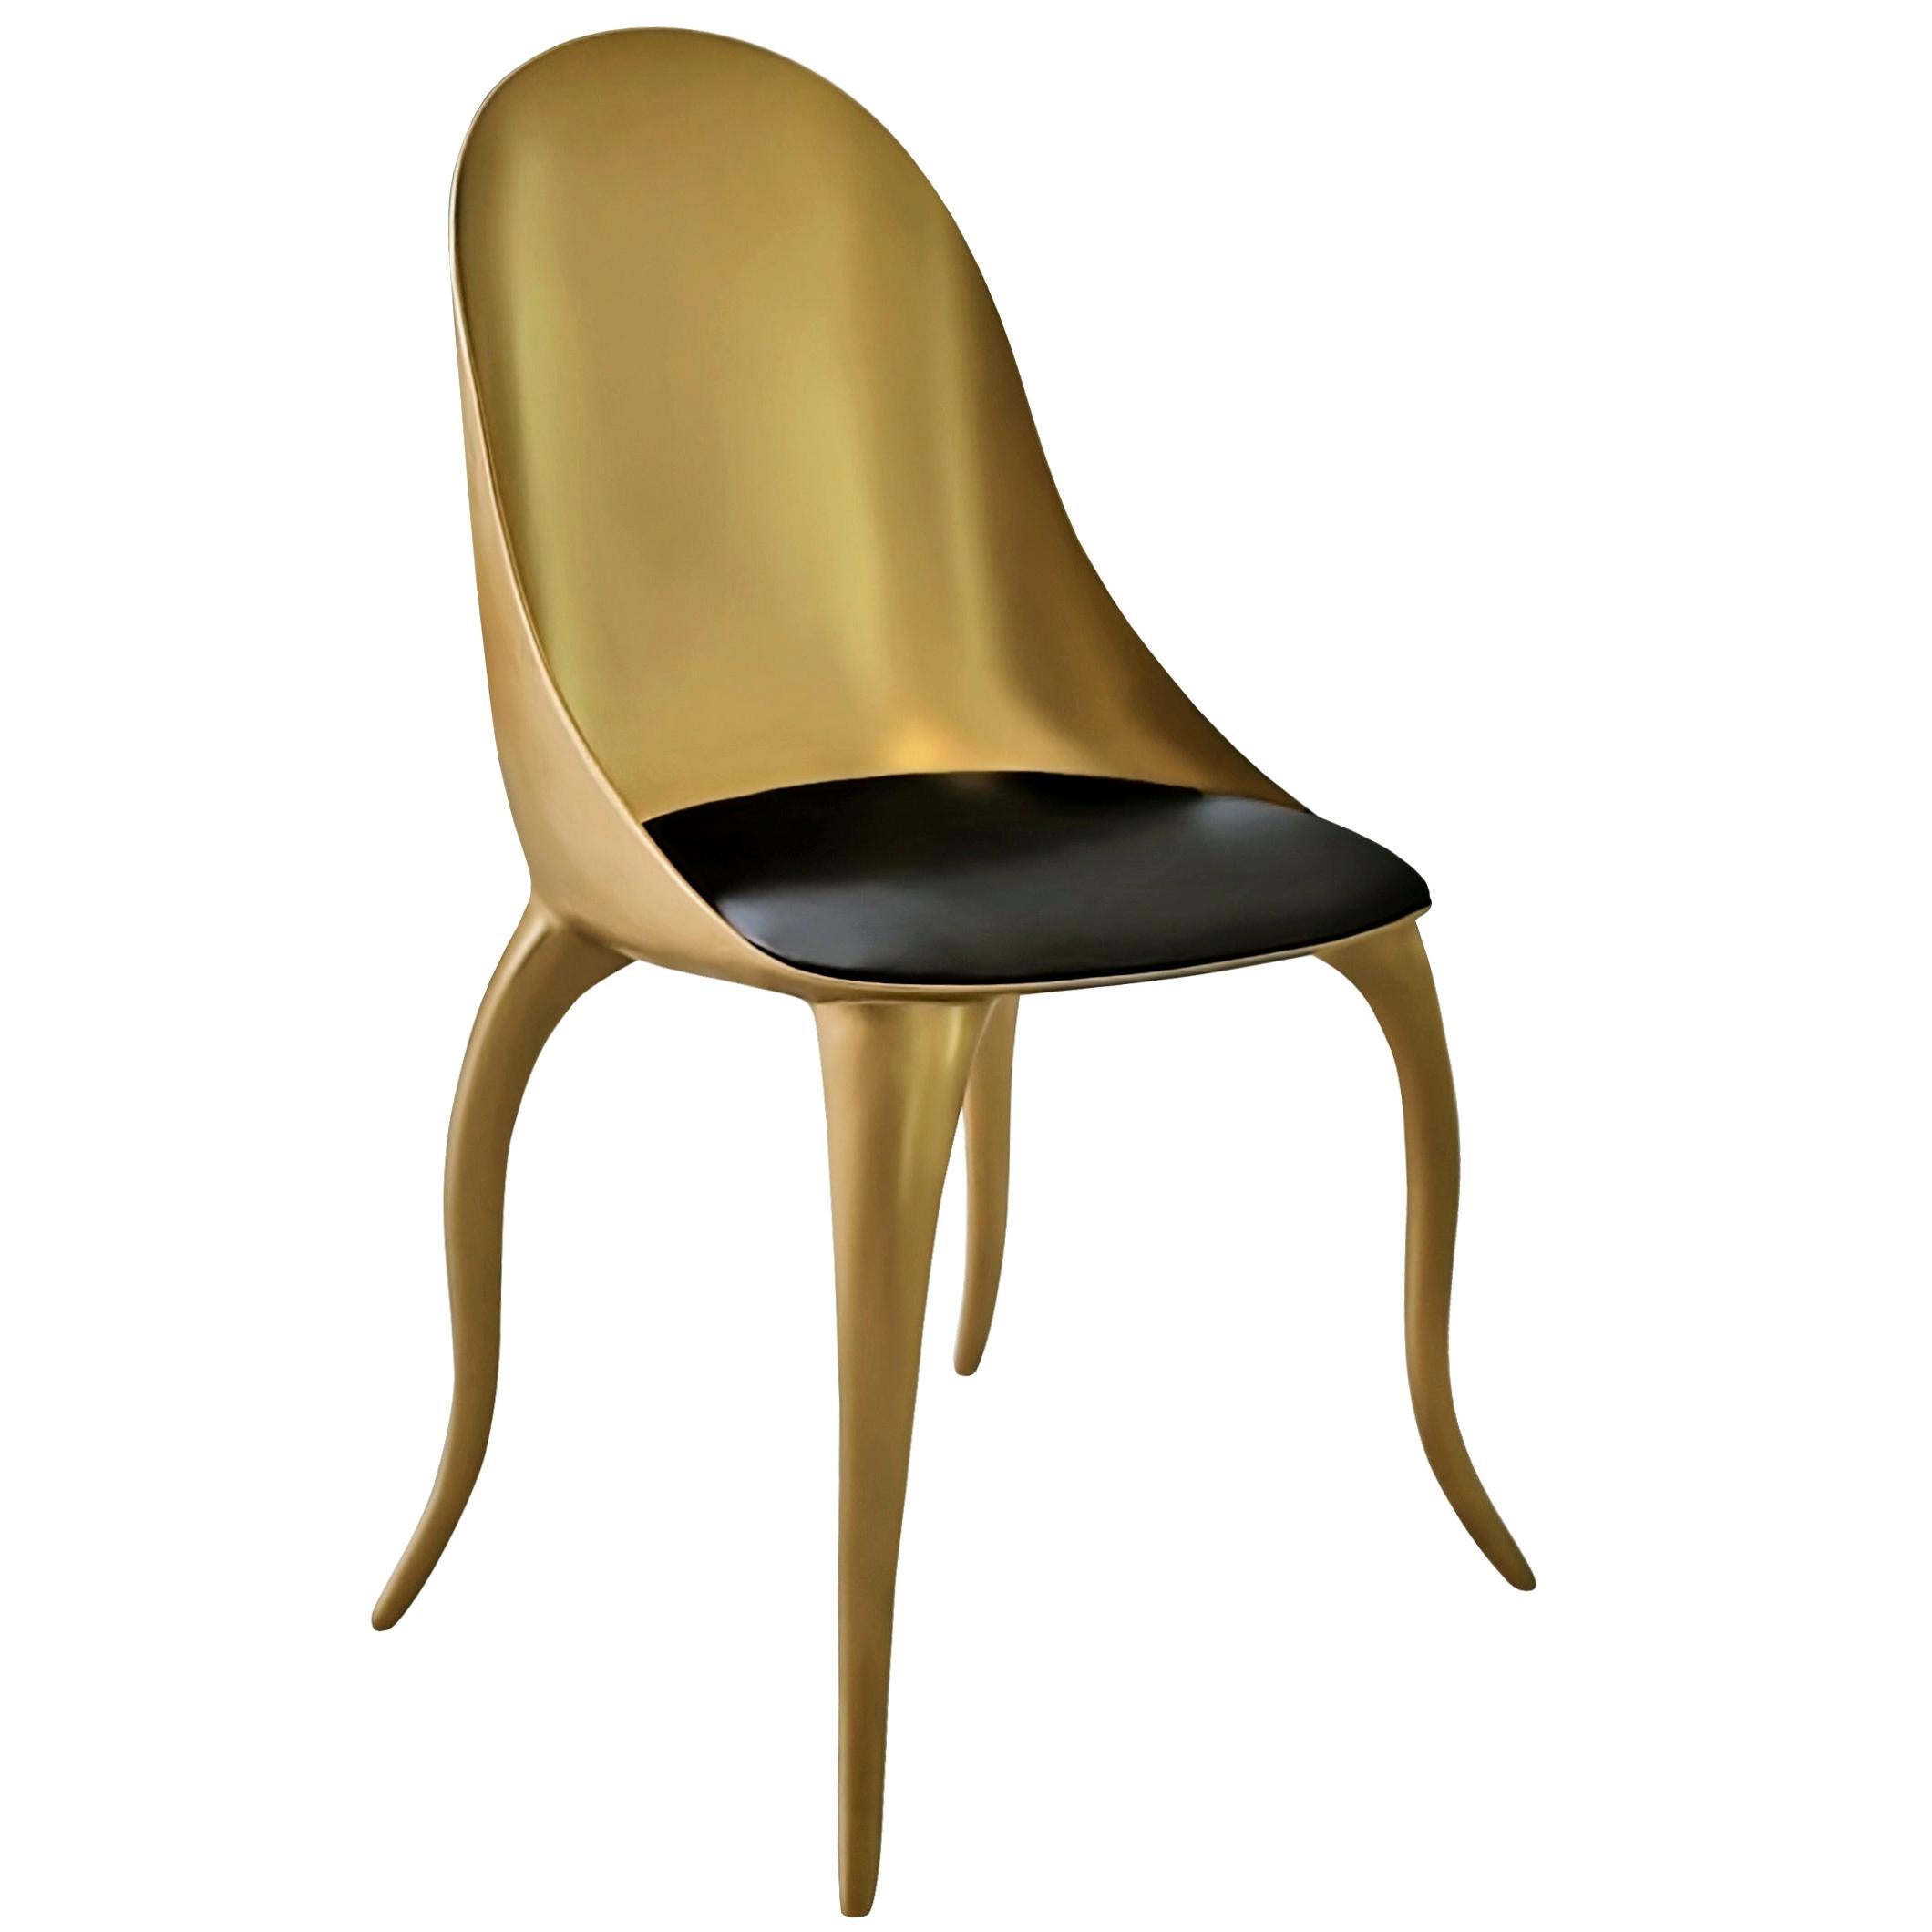 Sculptural and Luxurious "Star" Futuristic Organic Gilt Dining and Living Chair